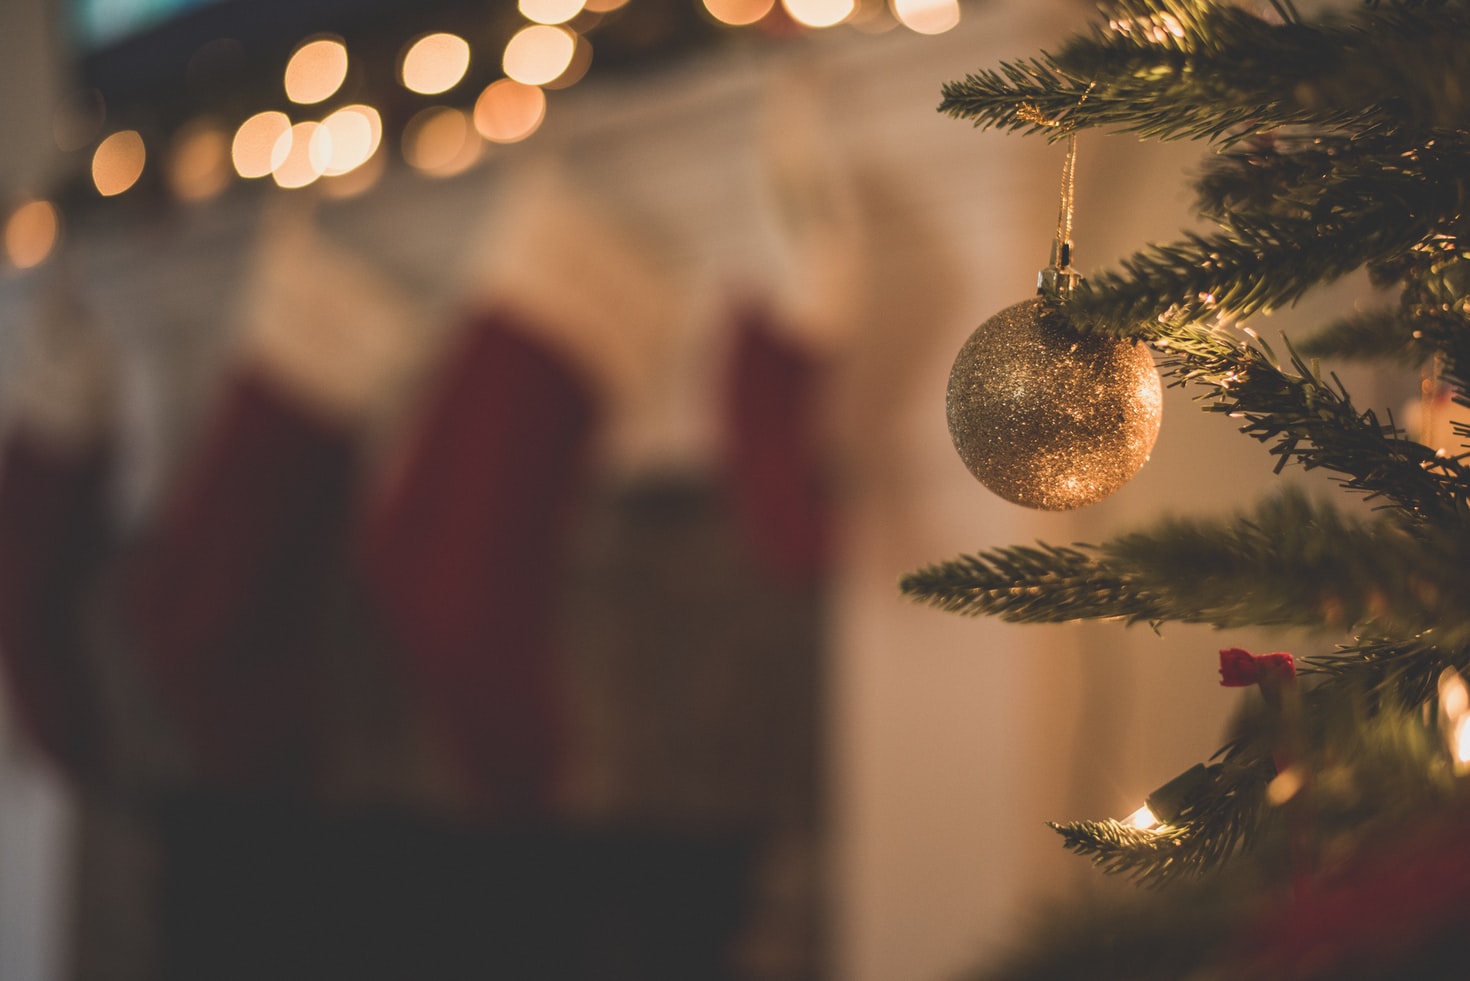 Our Customers’ Favorite Holiday Traditions to Get You in the Holiday Spirit